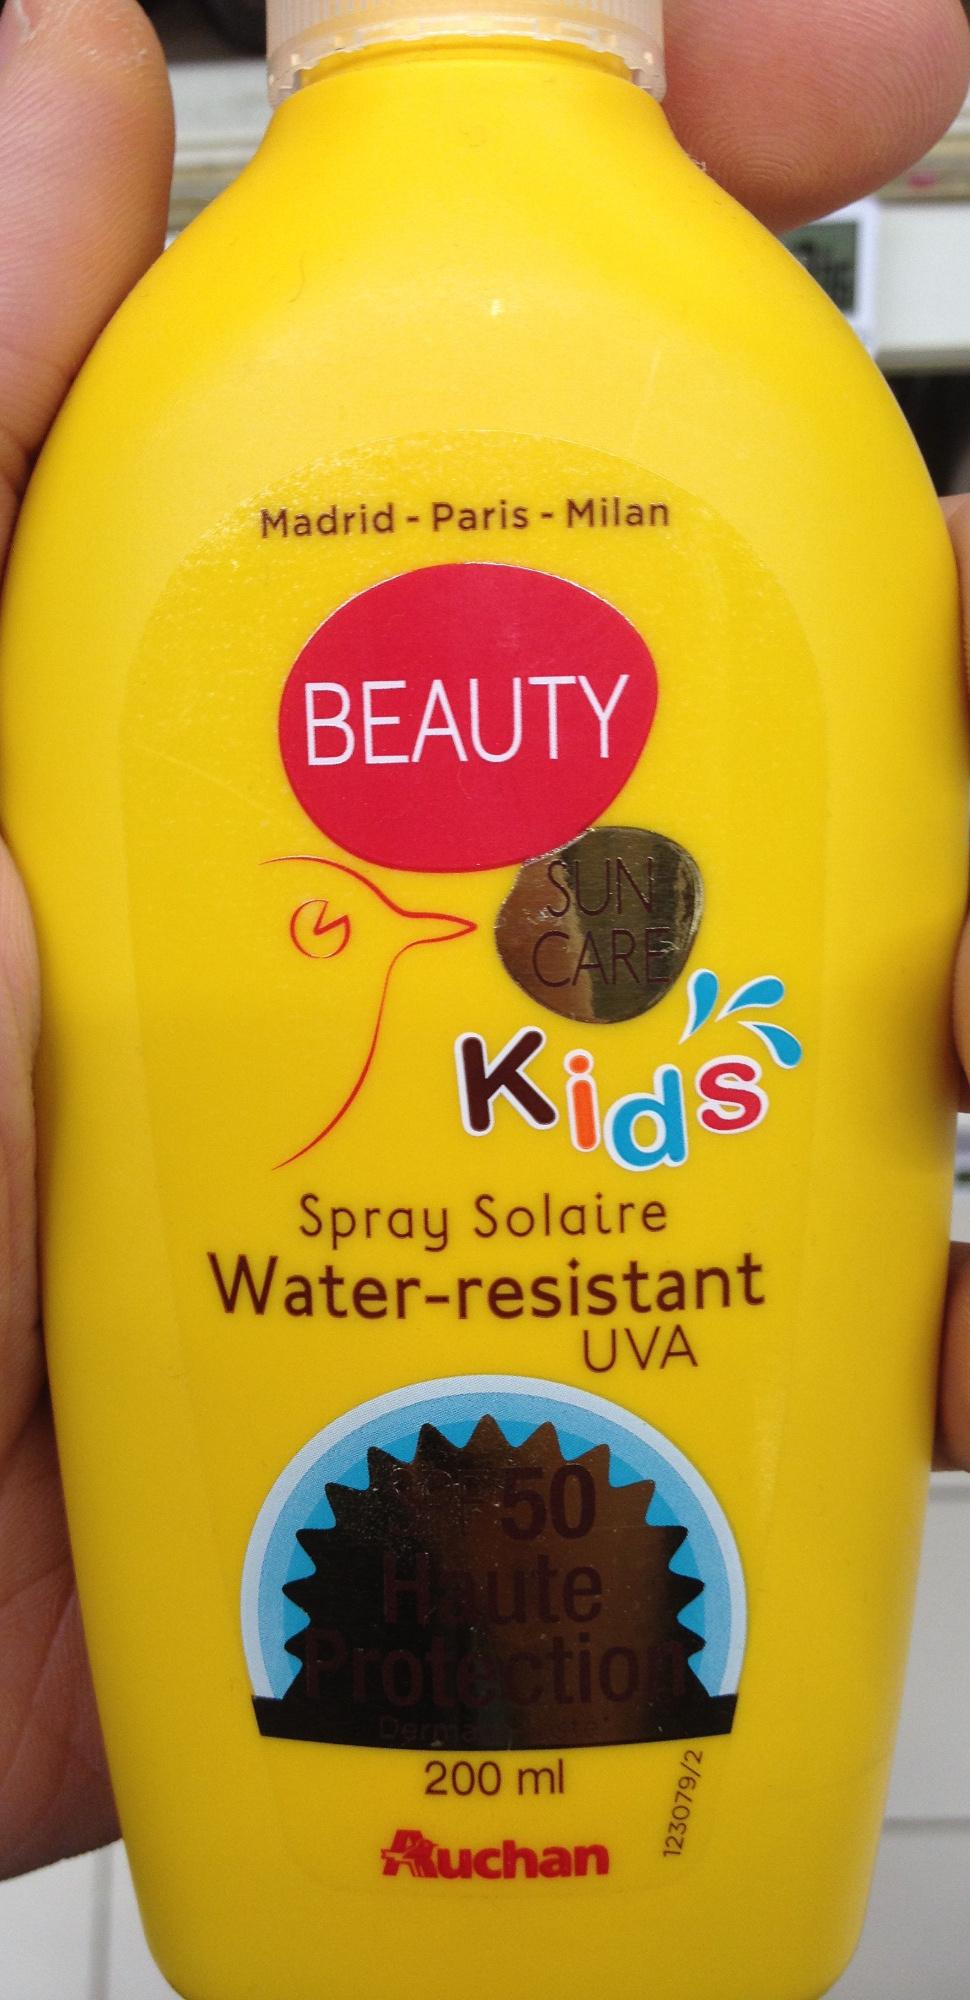 Spray solaire Water resistant UVA Kids - Product - fr